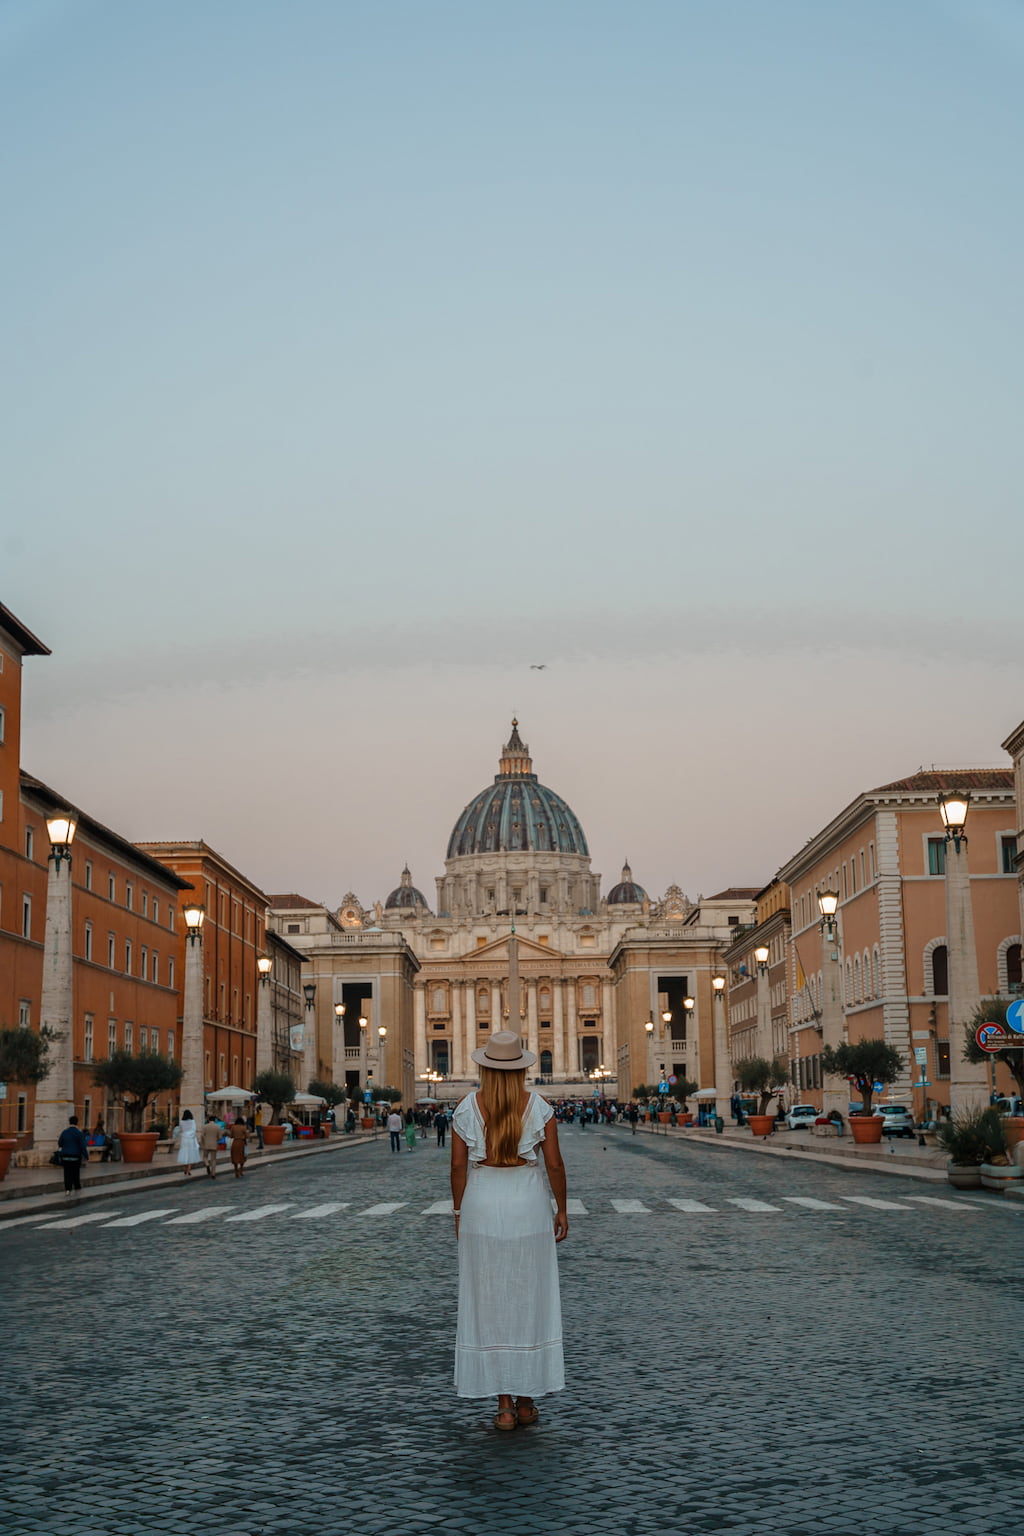 The Vatican and St Peter's Squere is the safest area to stay in Rome.